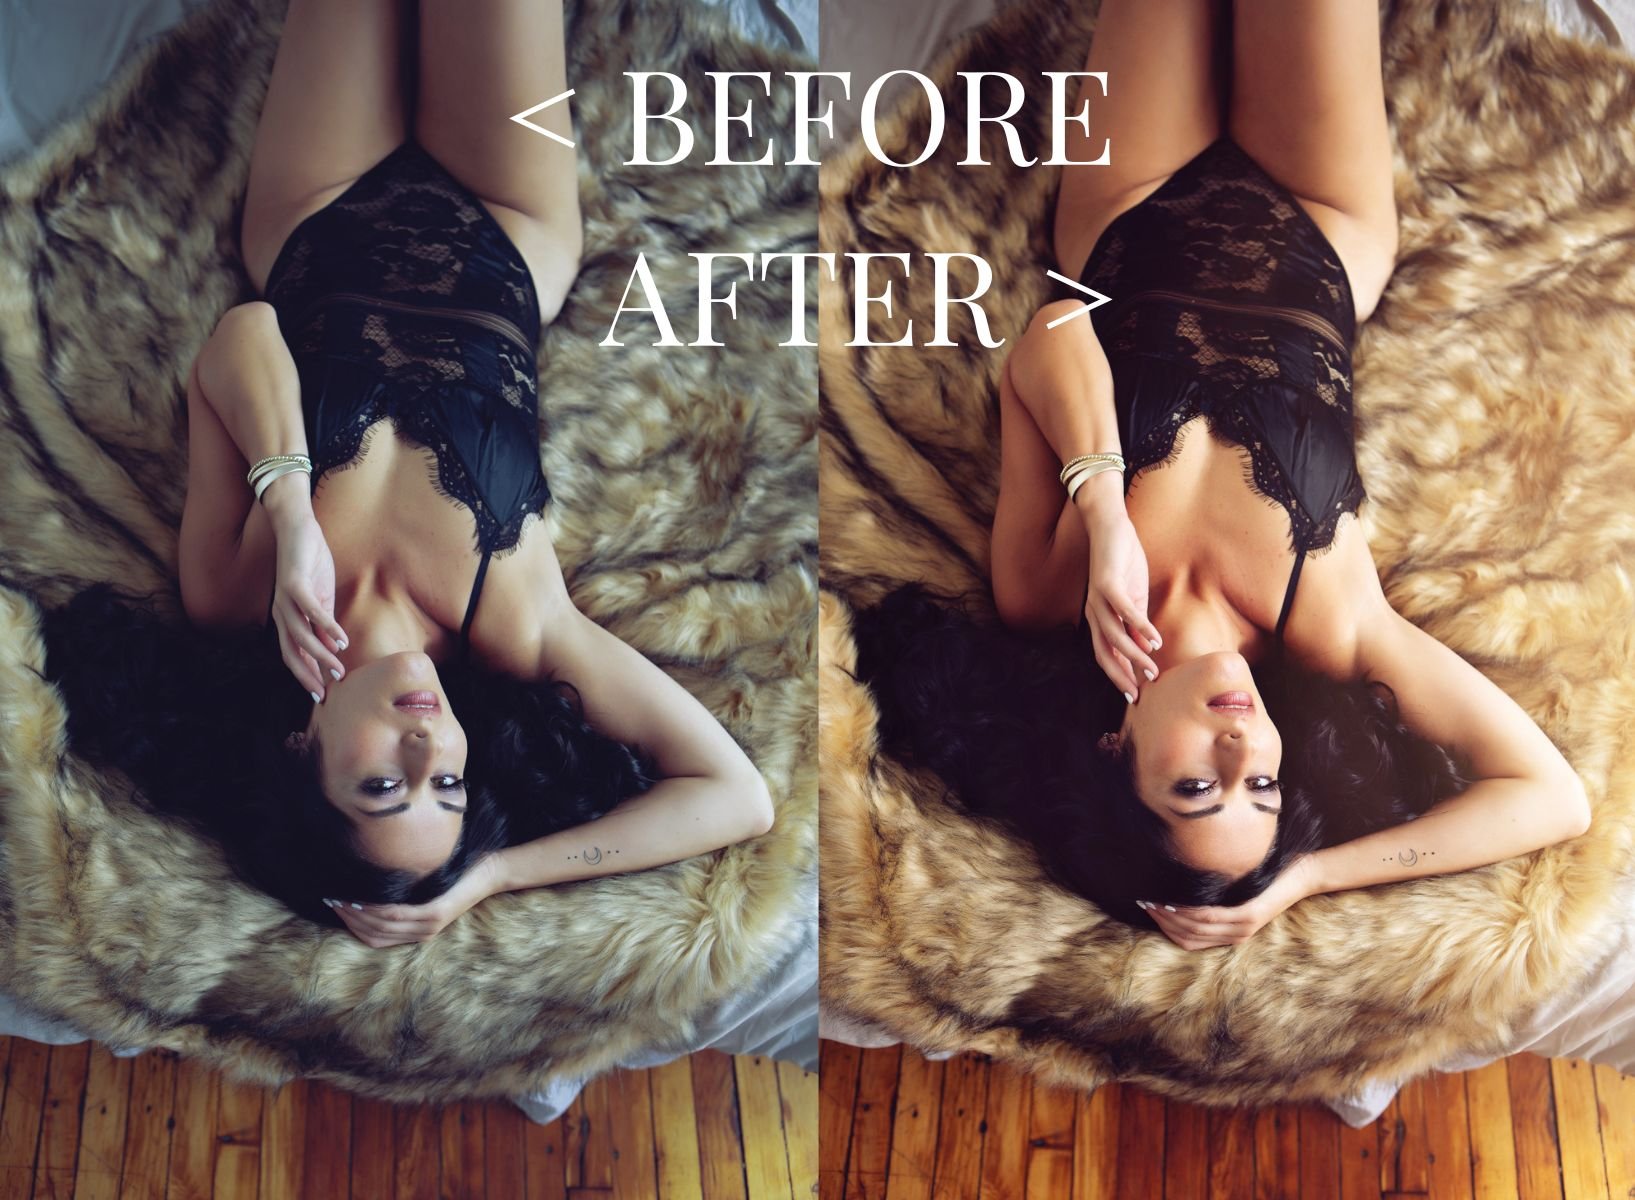 BEFORE AND AFTER EDITING LUXURY BOUDOIR PHOTOSHOOT